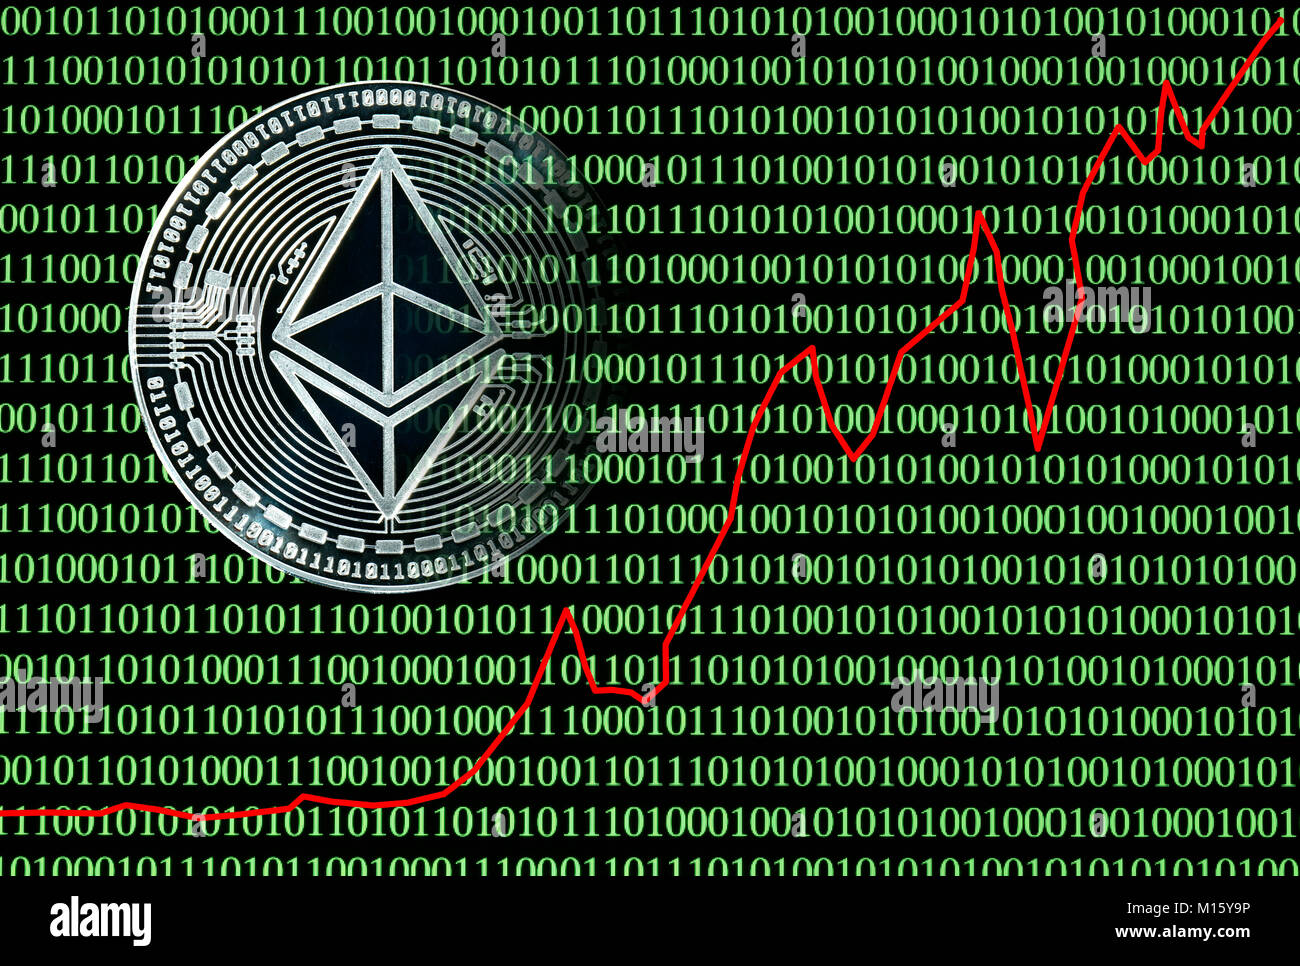 Symbol picture Cryptocurrency,digital currency,silver coin Ethereum in front of digital binary code with stock price Stock Photo